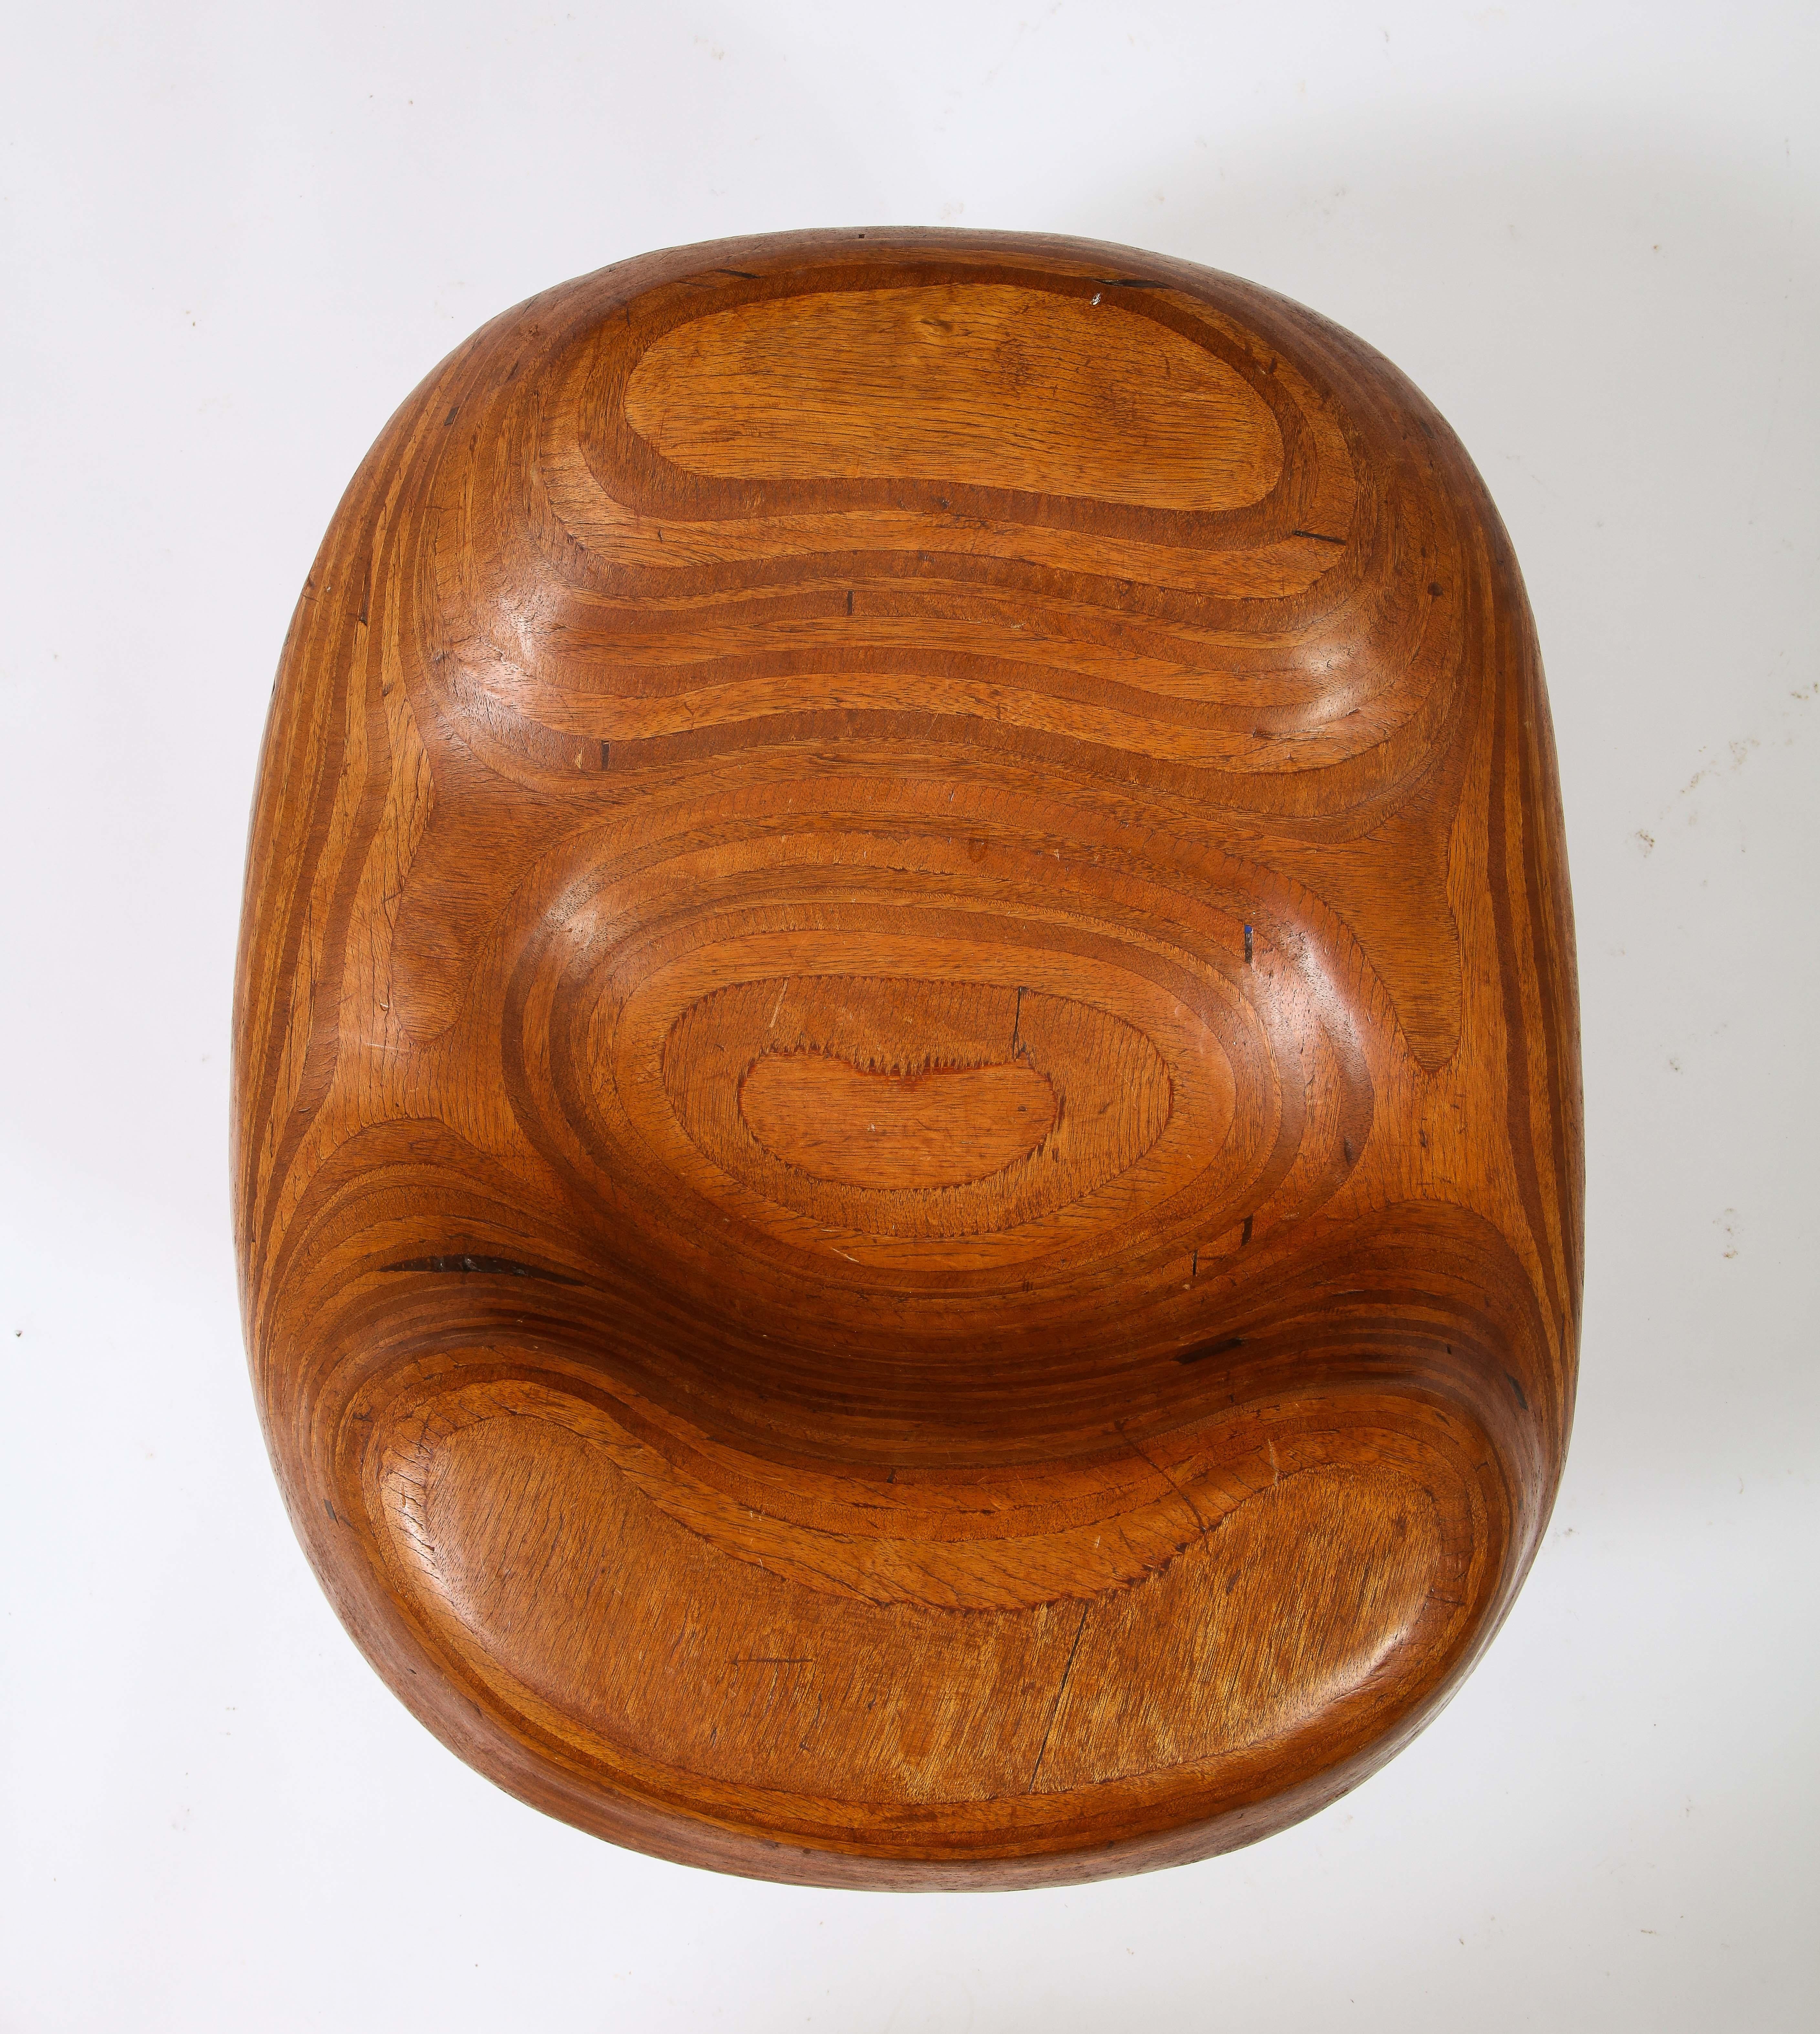 Denis Cospen Biomorphic Stool in Laminated Wood, France 1960's For Sale 7